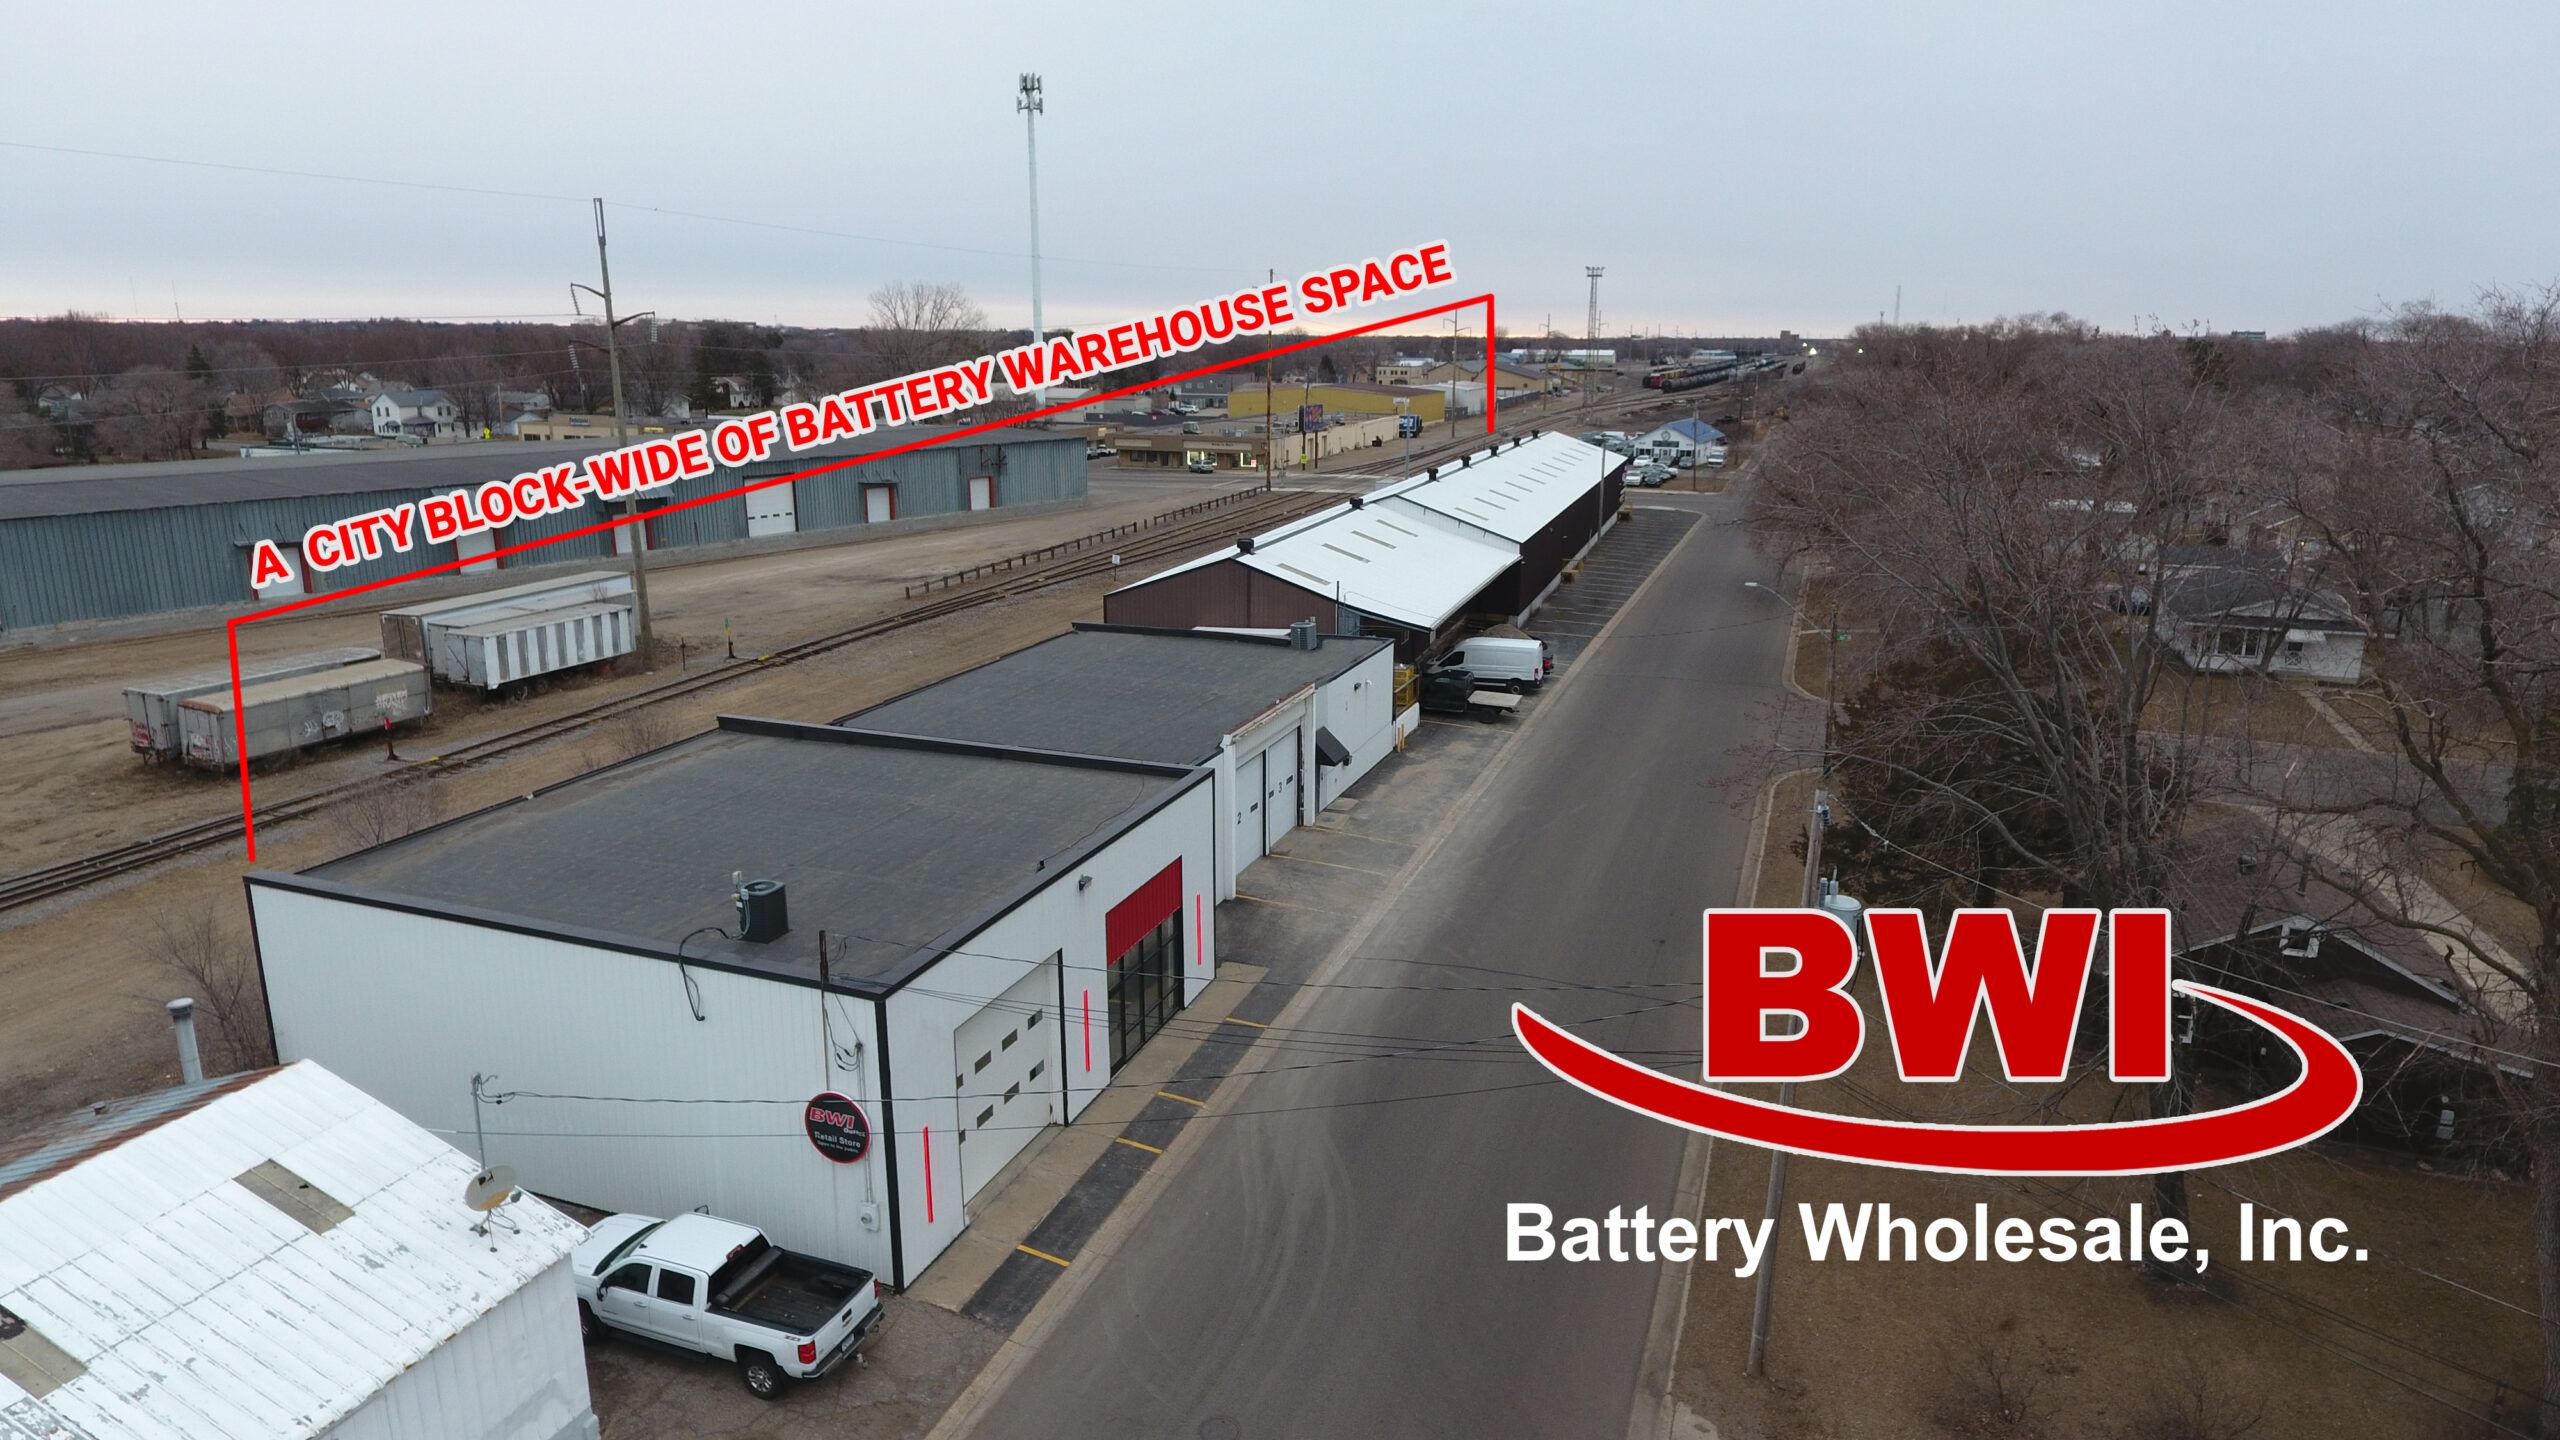 BWI has a city block wide of battery warehouse space.